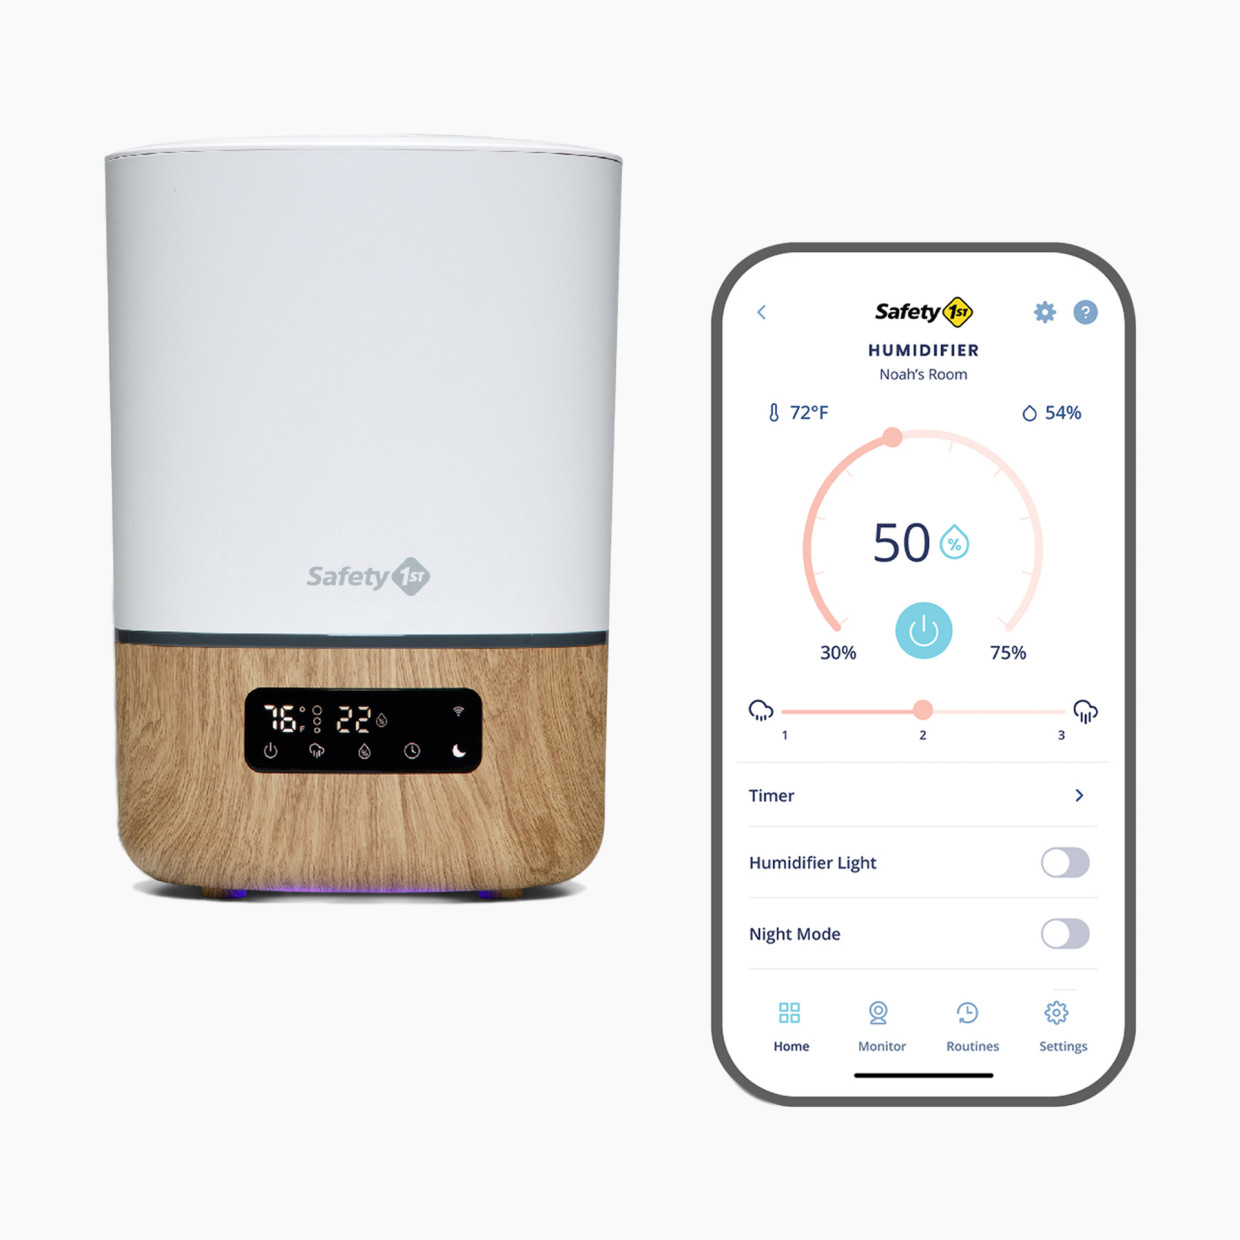 Safety 1st Connected Nursery Smart Humidifier.